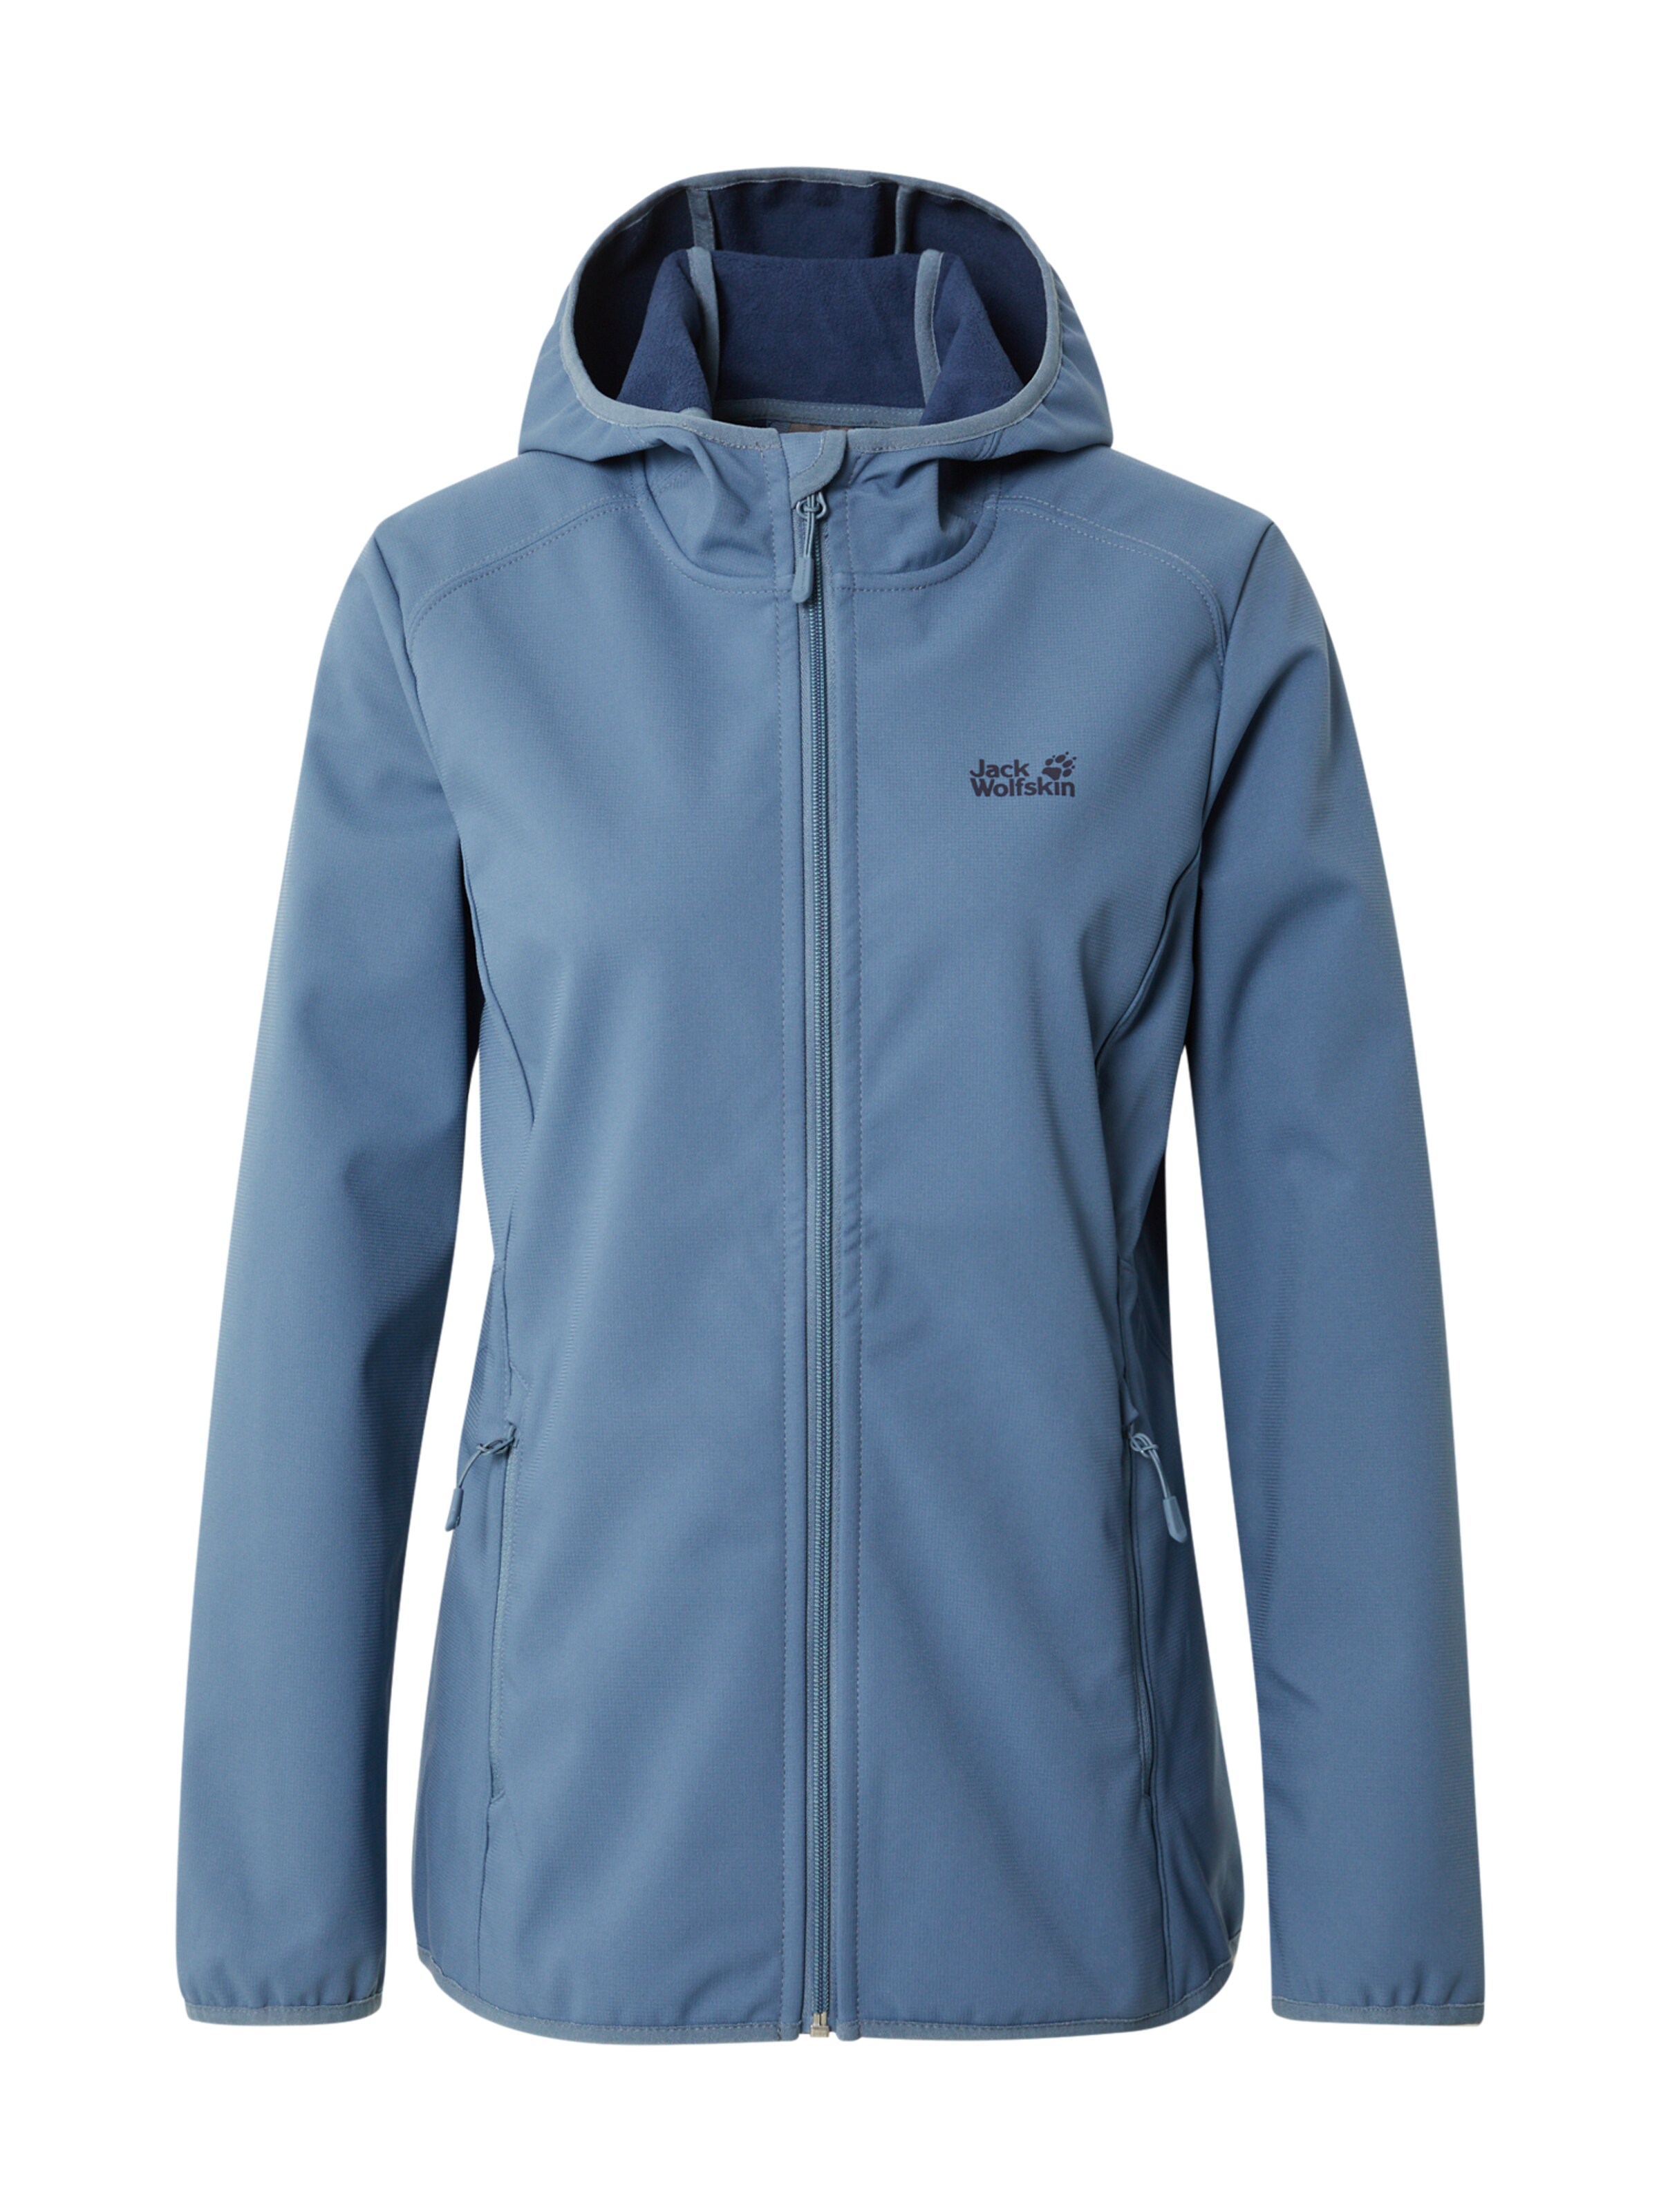 Tipi di sport 3pR2O JACK WOLFSKIN Giacca per outdoor NORTHERN POINT in Blu Fumo 